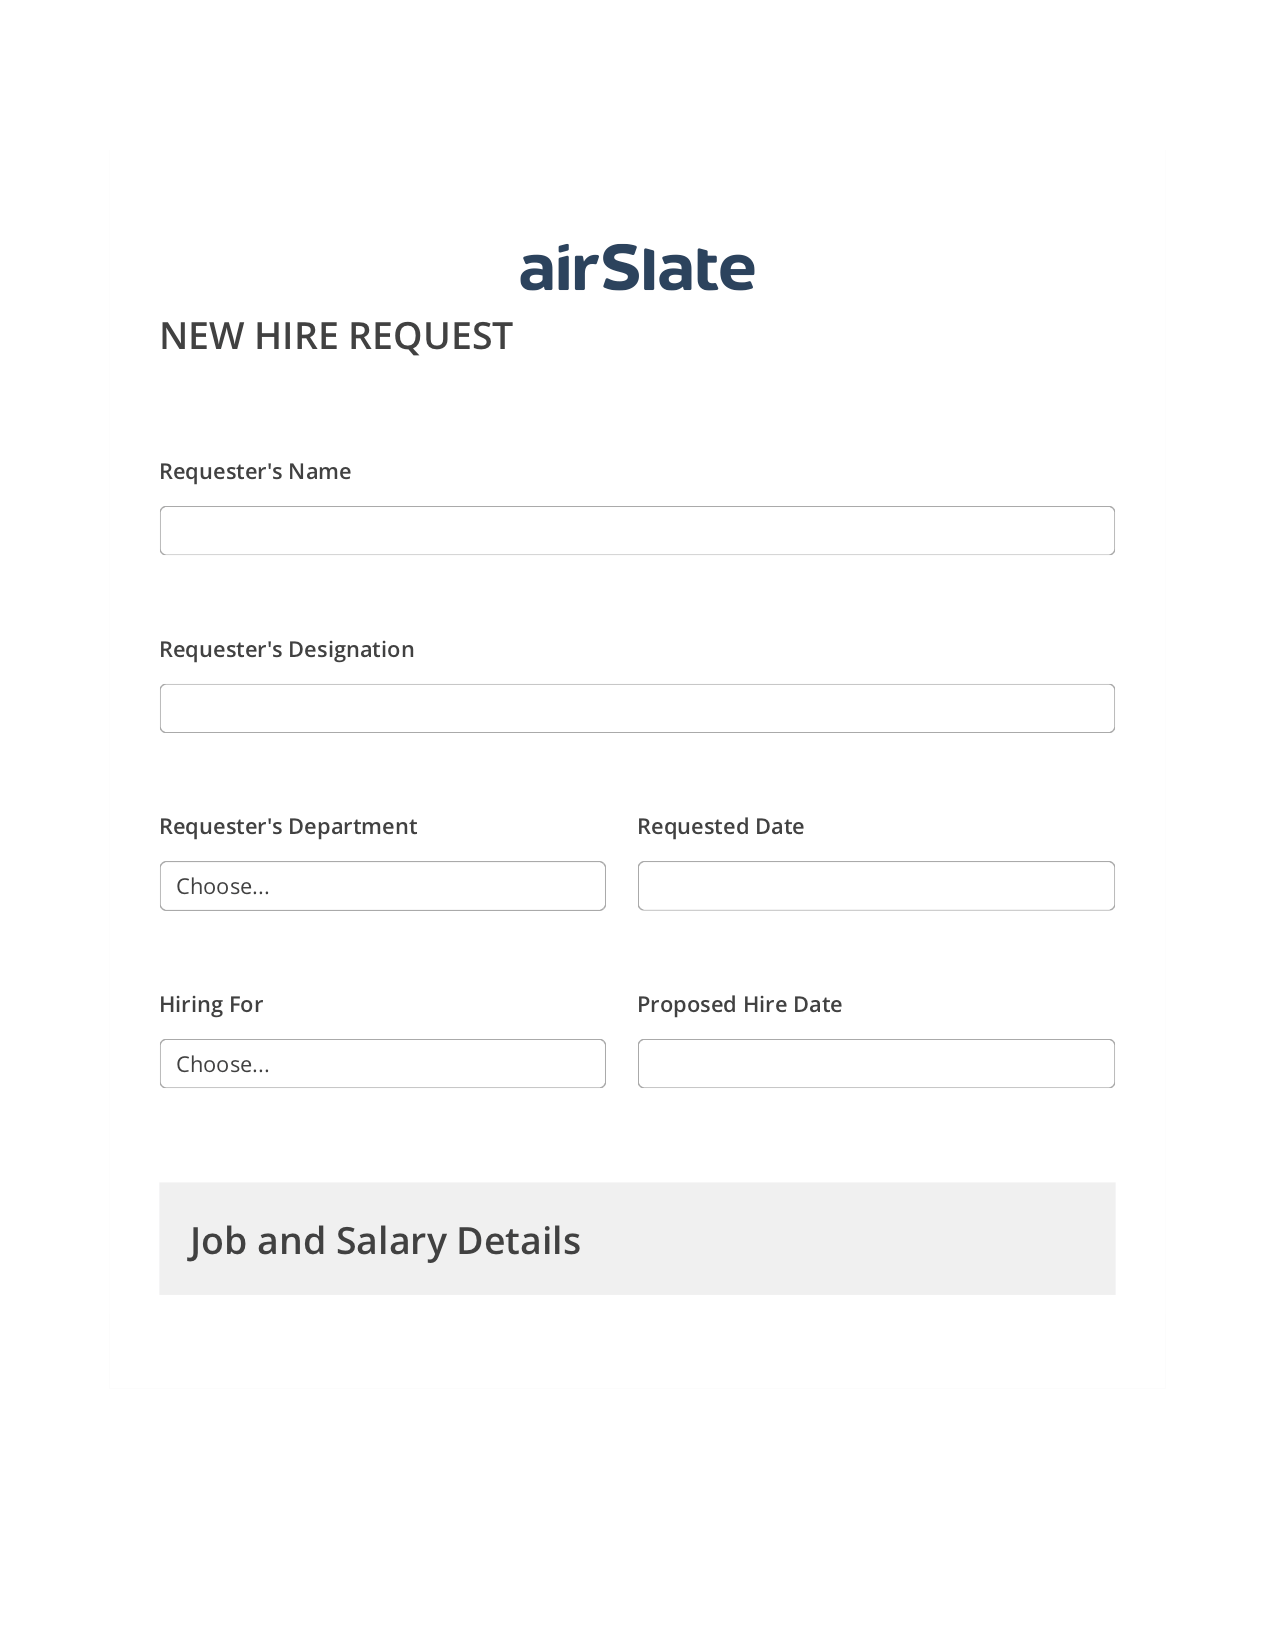 Multirole Hiring Request Workflow Pre-fill from Excel Spreadsheet Bot, Send a Slate to Salesforce Contact Bot, Archive to SharePoint Folder Bot